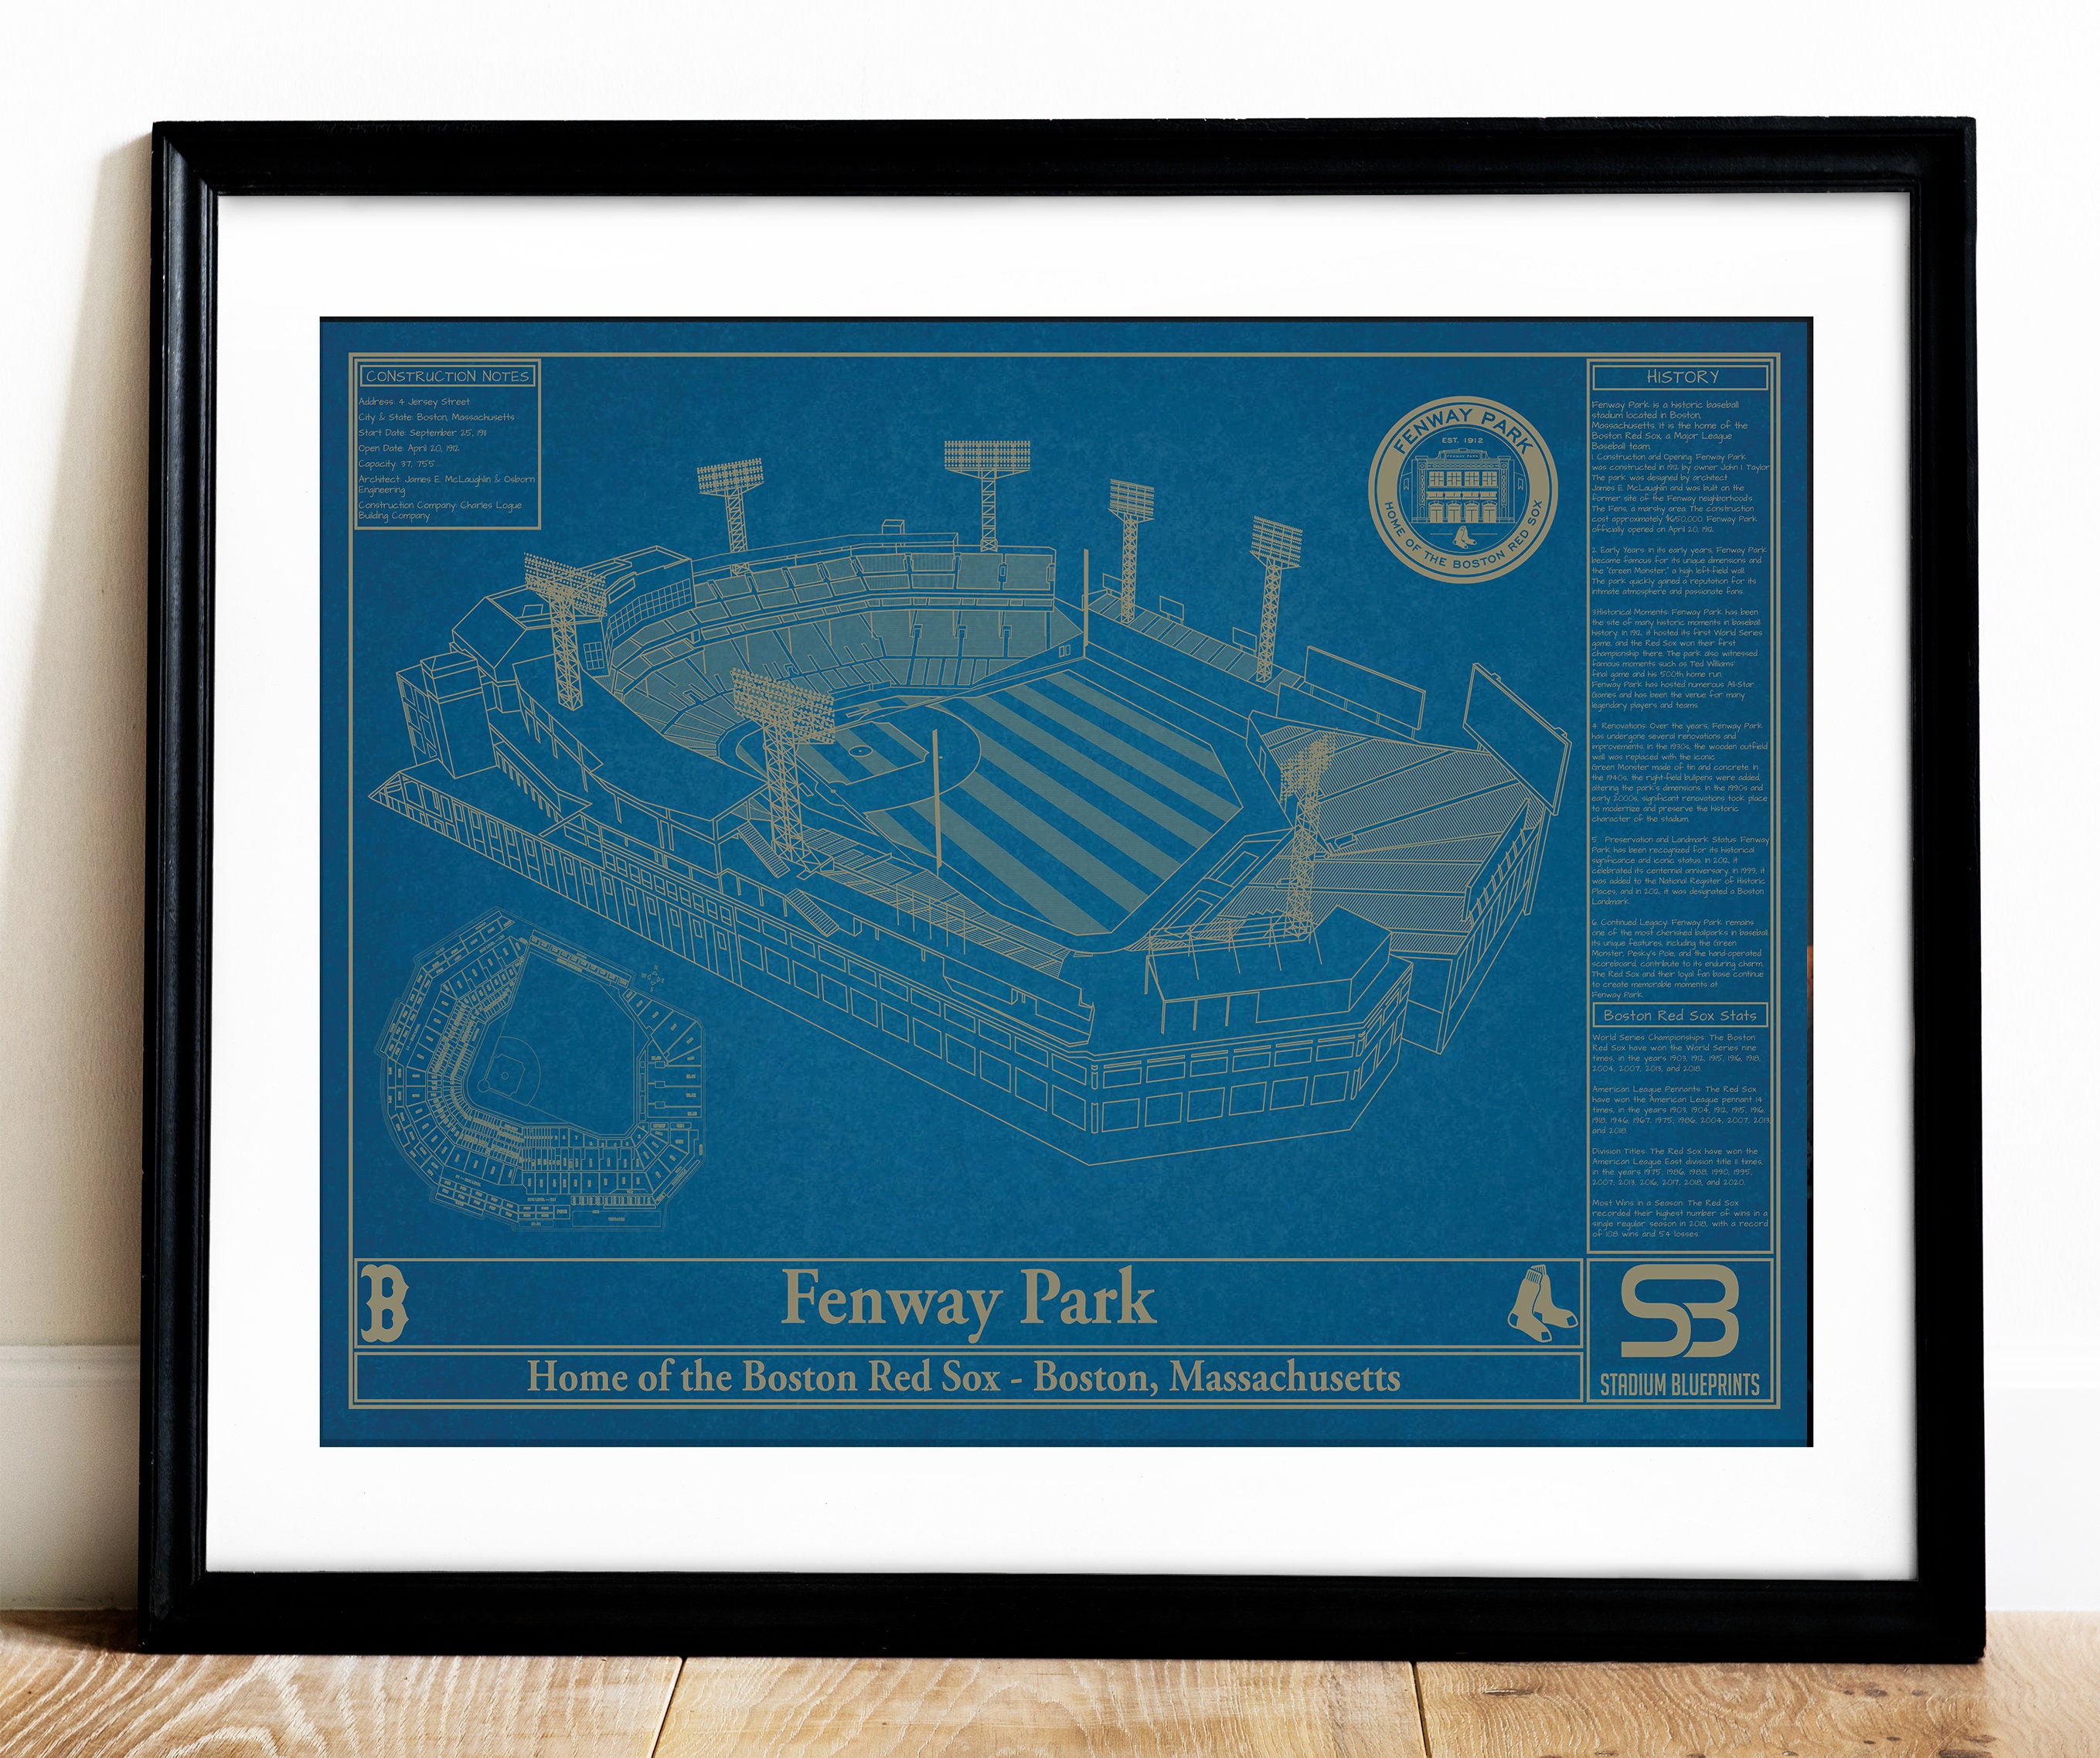 Boston Red Sox Poster, Fenway Park Green Monster, Red Sox Art